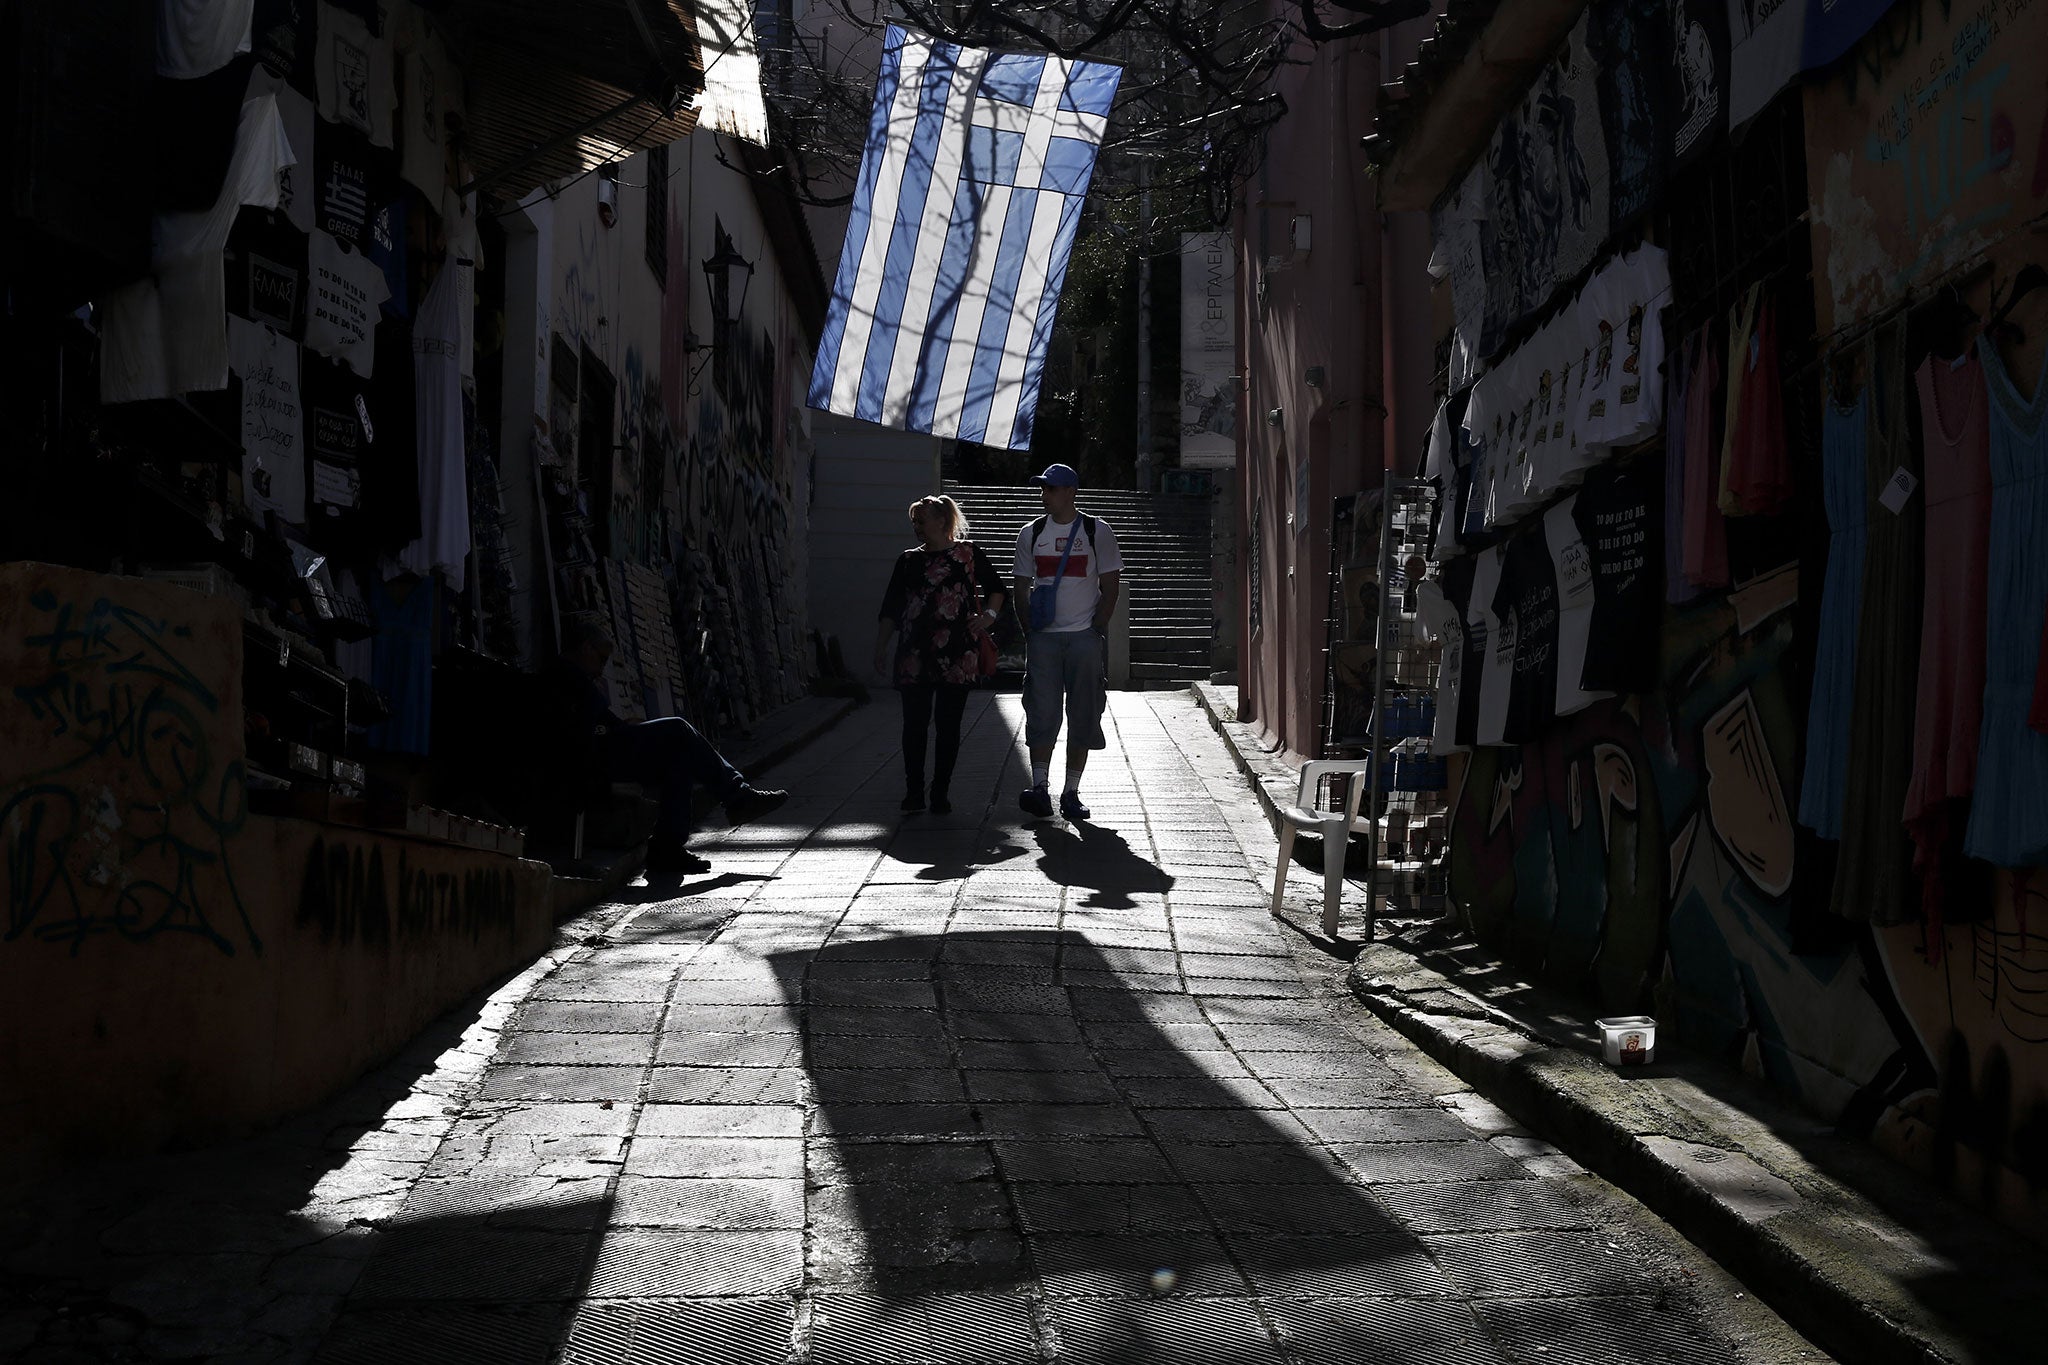 Athens this week is waiting to see if a deal can be made with eurozone finance ministers, but a Greek exit might give those ministers a welcome wake-up call